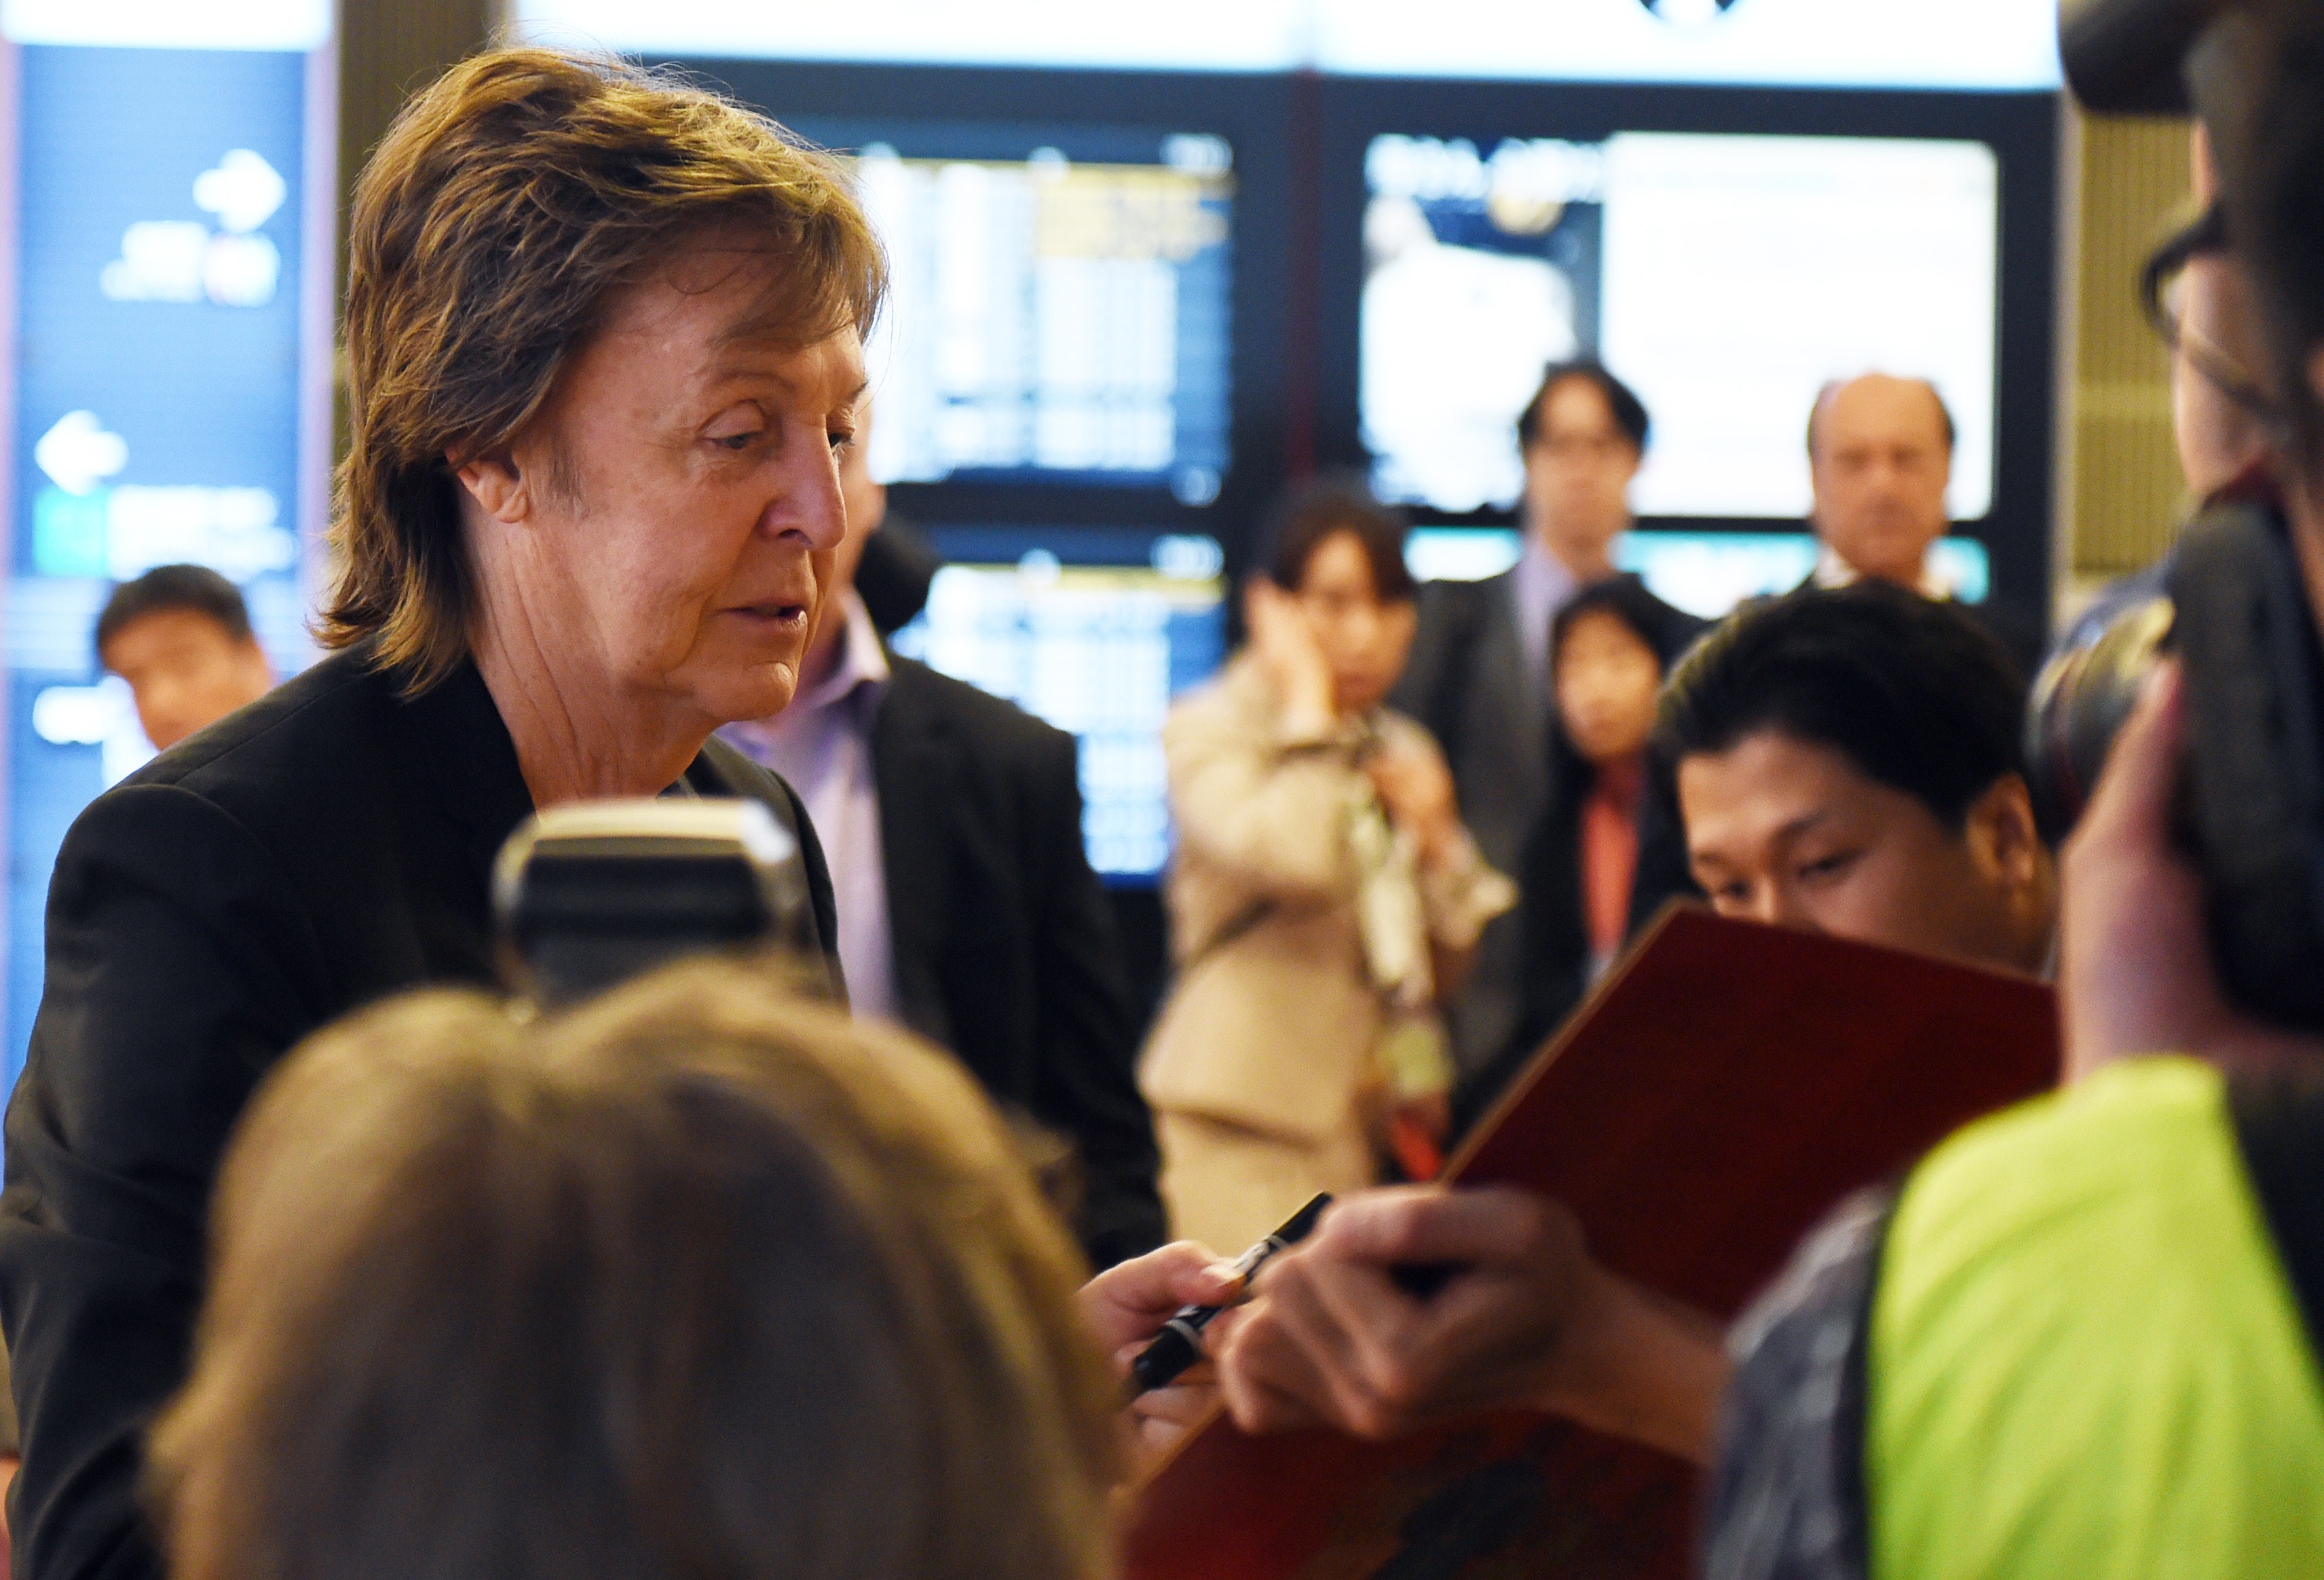 Paul McCartney (L) signs his autograph upon his arrival at the Haneda airport in Tokyo on May 15, 2014. (TOSHIFUMI KITAMURA—AFP/Getty Images)